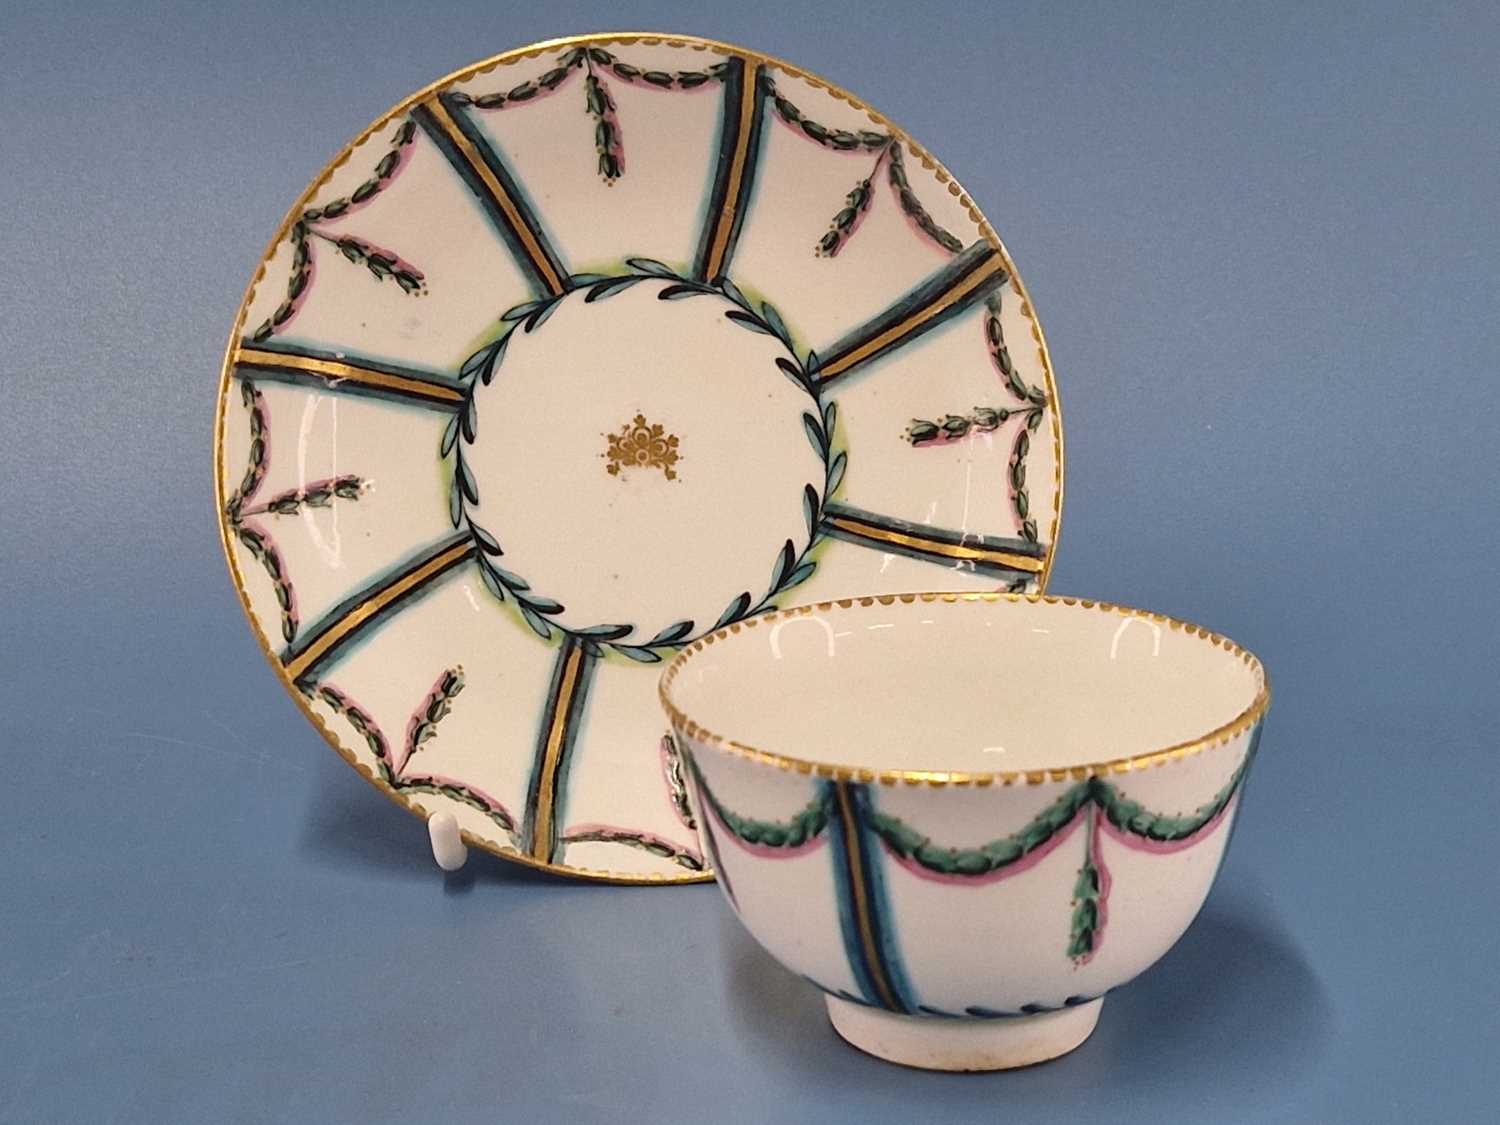 A Chelsea Derby tea bowl and saucer painted in pink, turquoise and green with drapery swags in